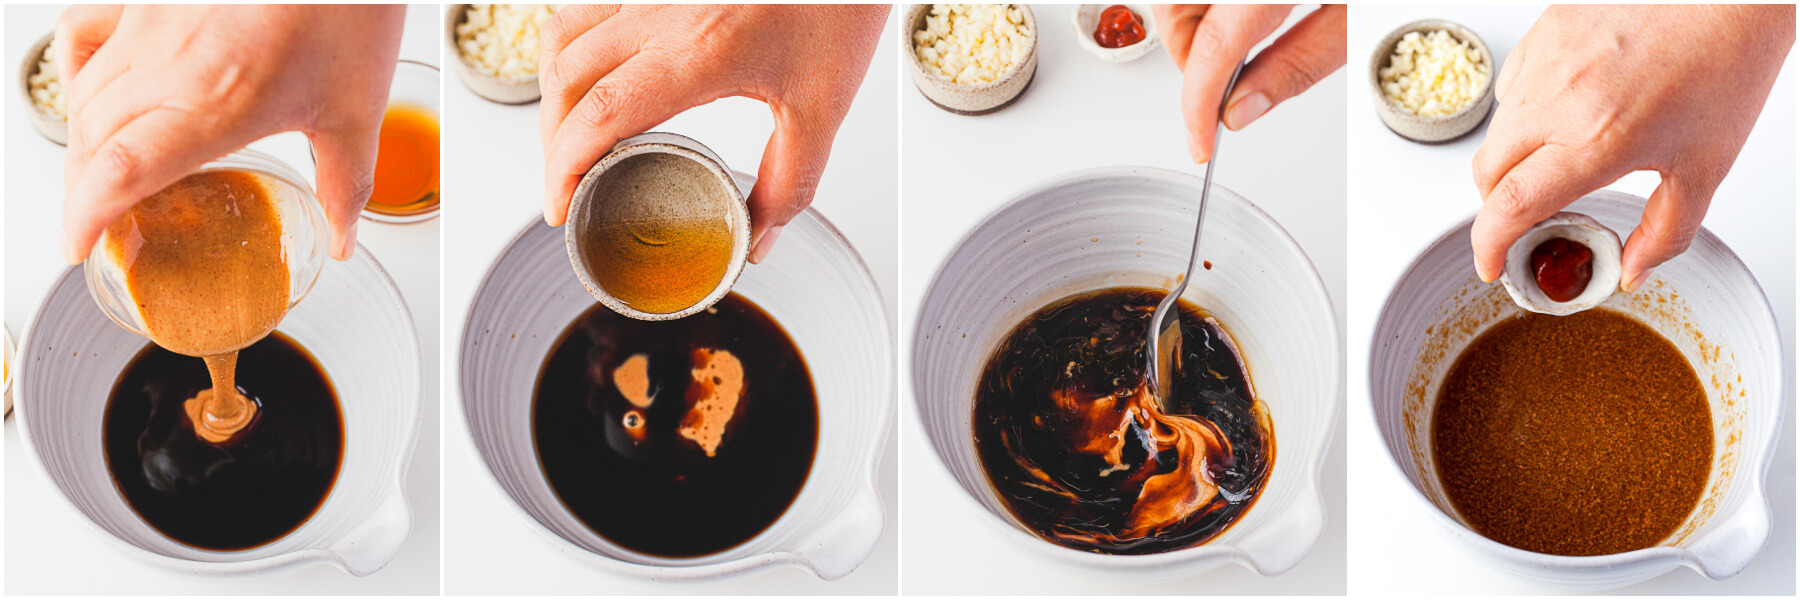 A series of process images showing how to make peanut sauce.